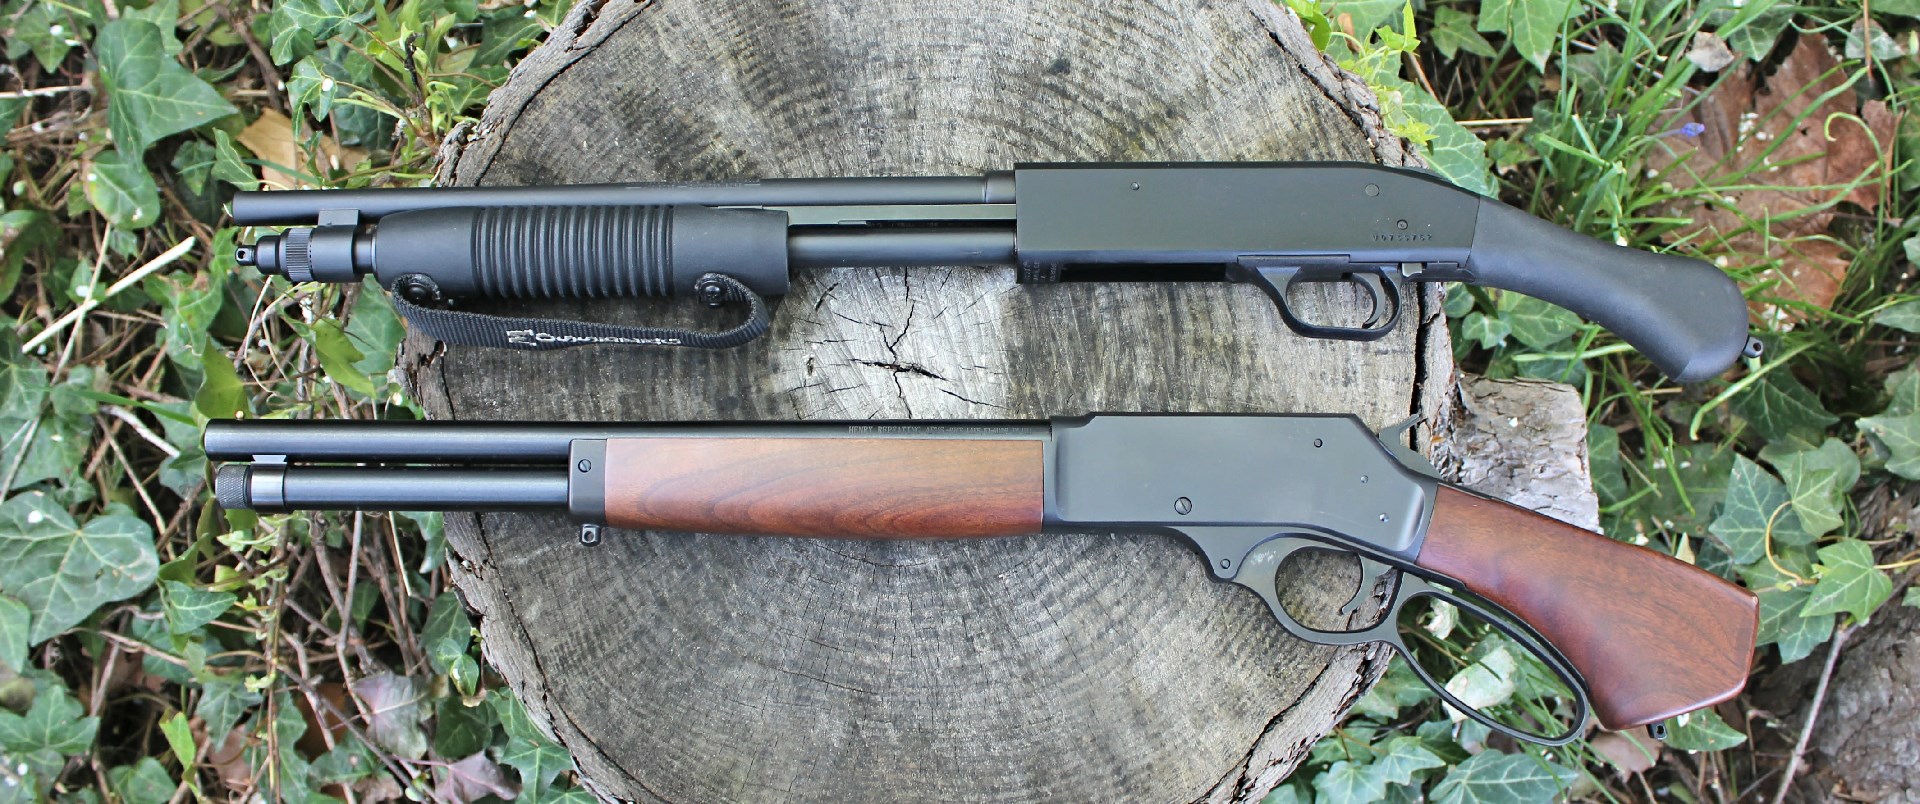 Non-NFA firearms chambered for .410 bore shells include the pump-action Mossberg 590 Shockwave (TOP) and the lever-action Henry Repeating Arms Axe (Bottom).